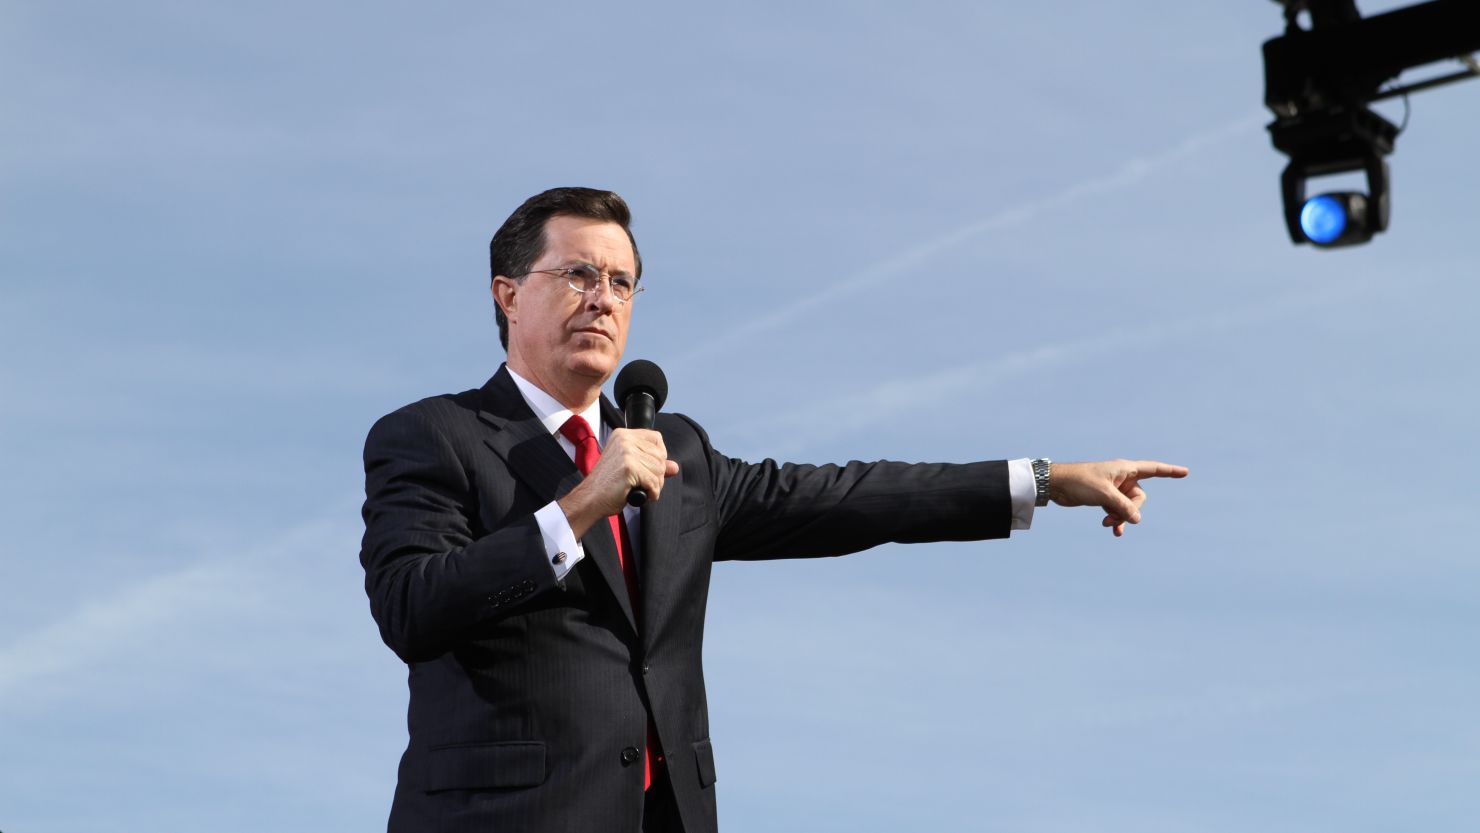  Comedian Stephen Colbert at the "Rally to Restore Fear and/or Sanity" in 2010 in Washington, D.C.